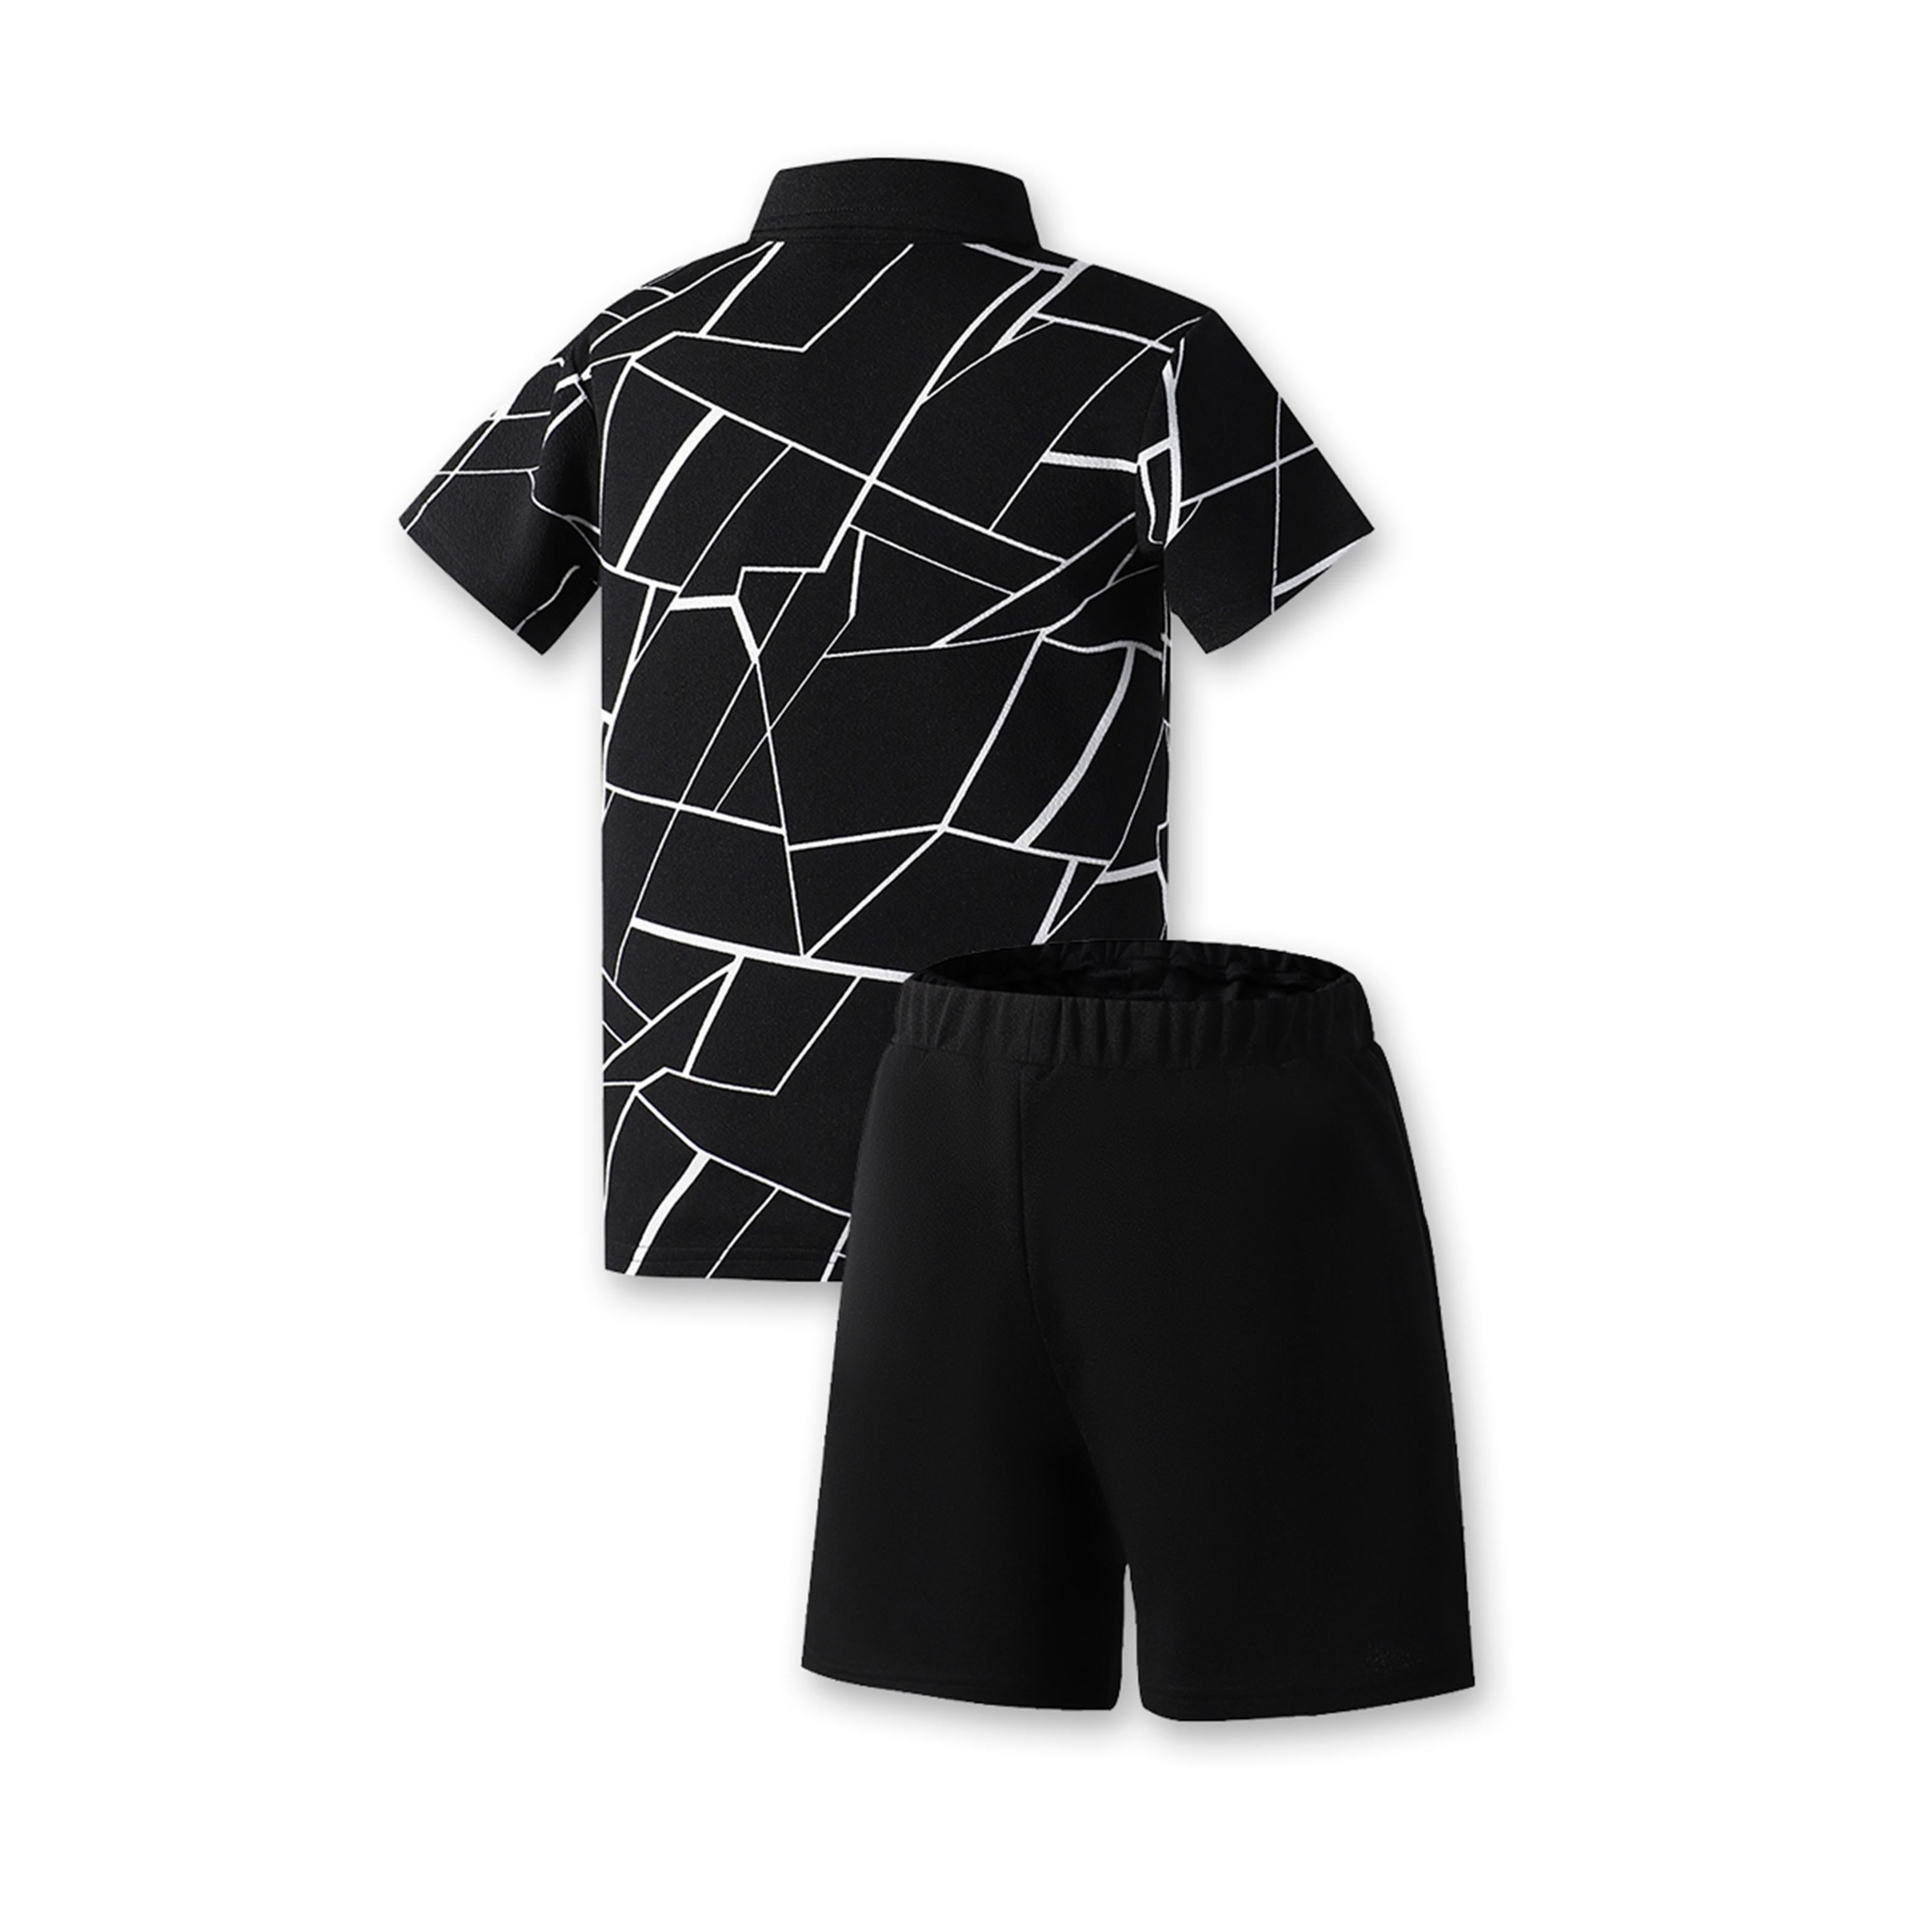 7-15Y Ready Stock Kids Boys Clothes Geographical Printing Summer Turn-down Collar Shirt Elastic Shorts 2Pcs Outfits Set Black Catpapa 462312461